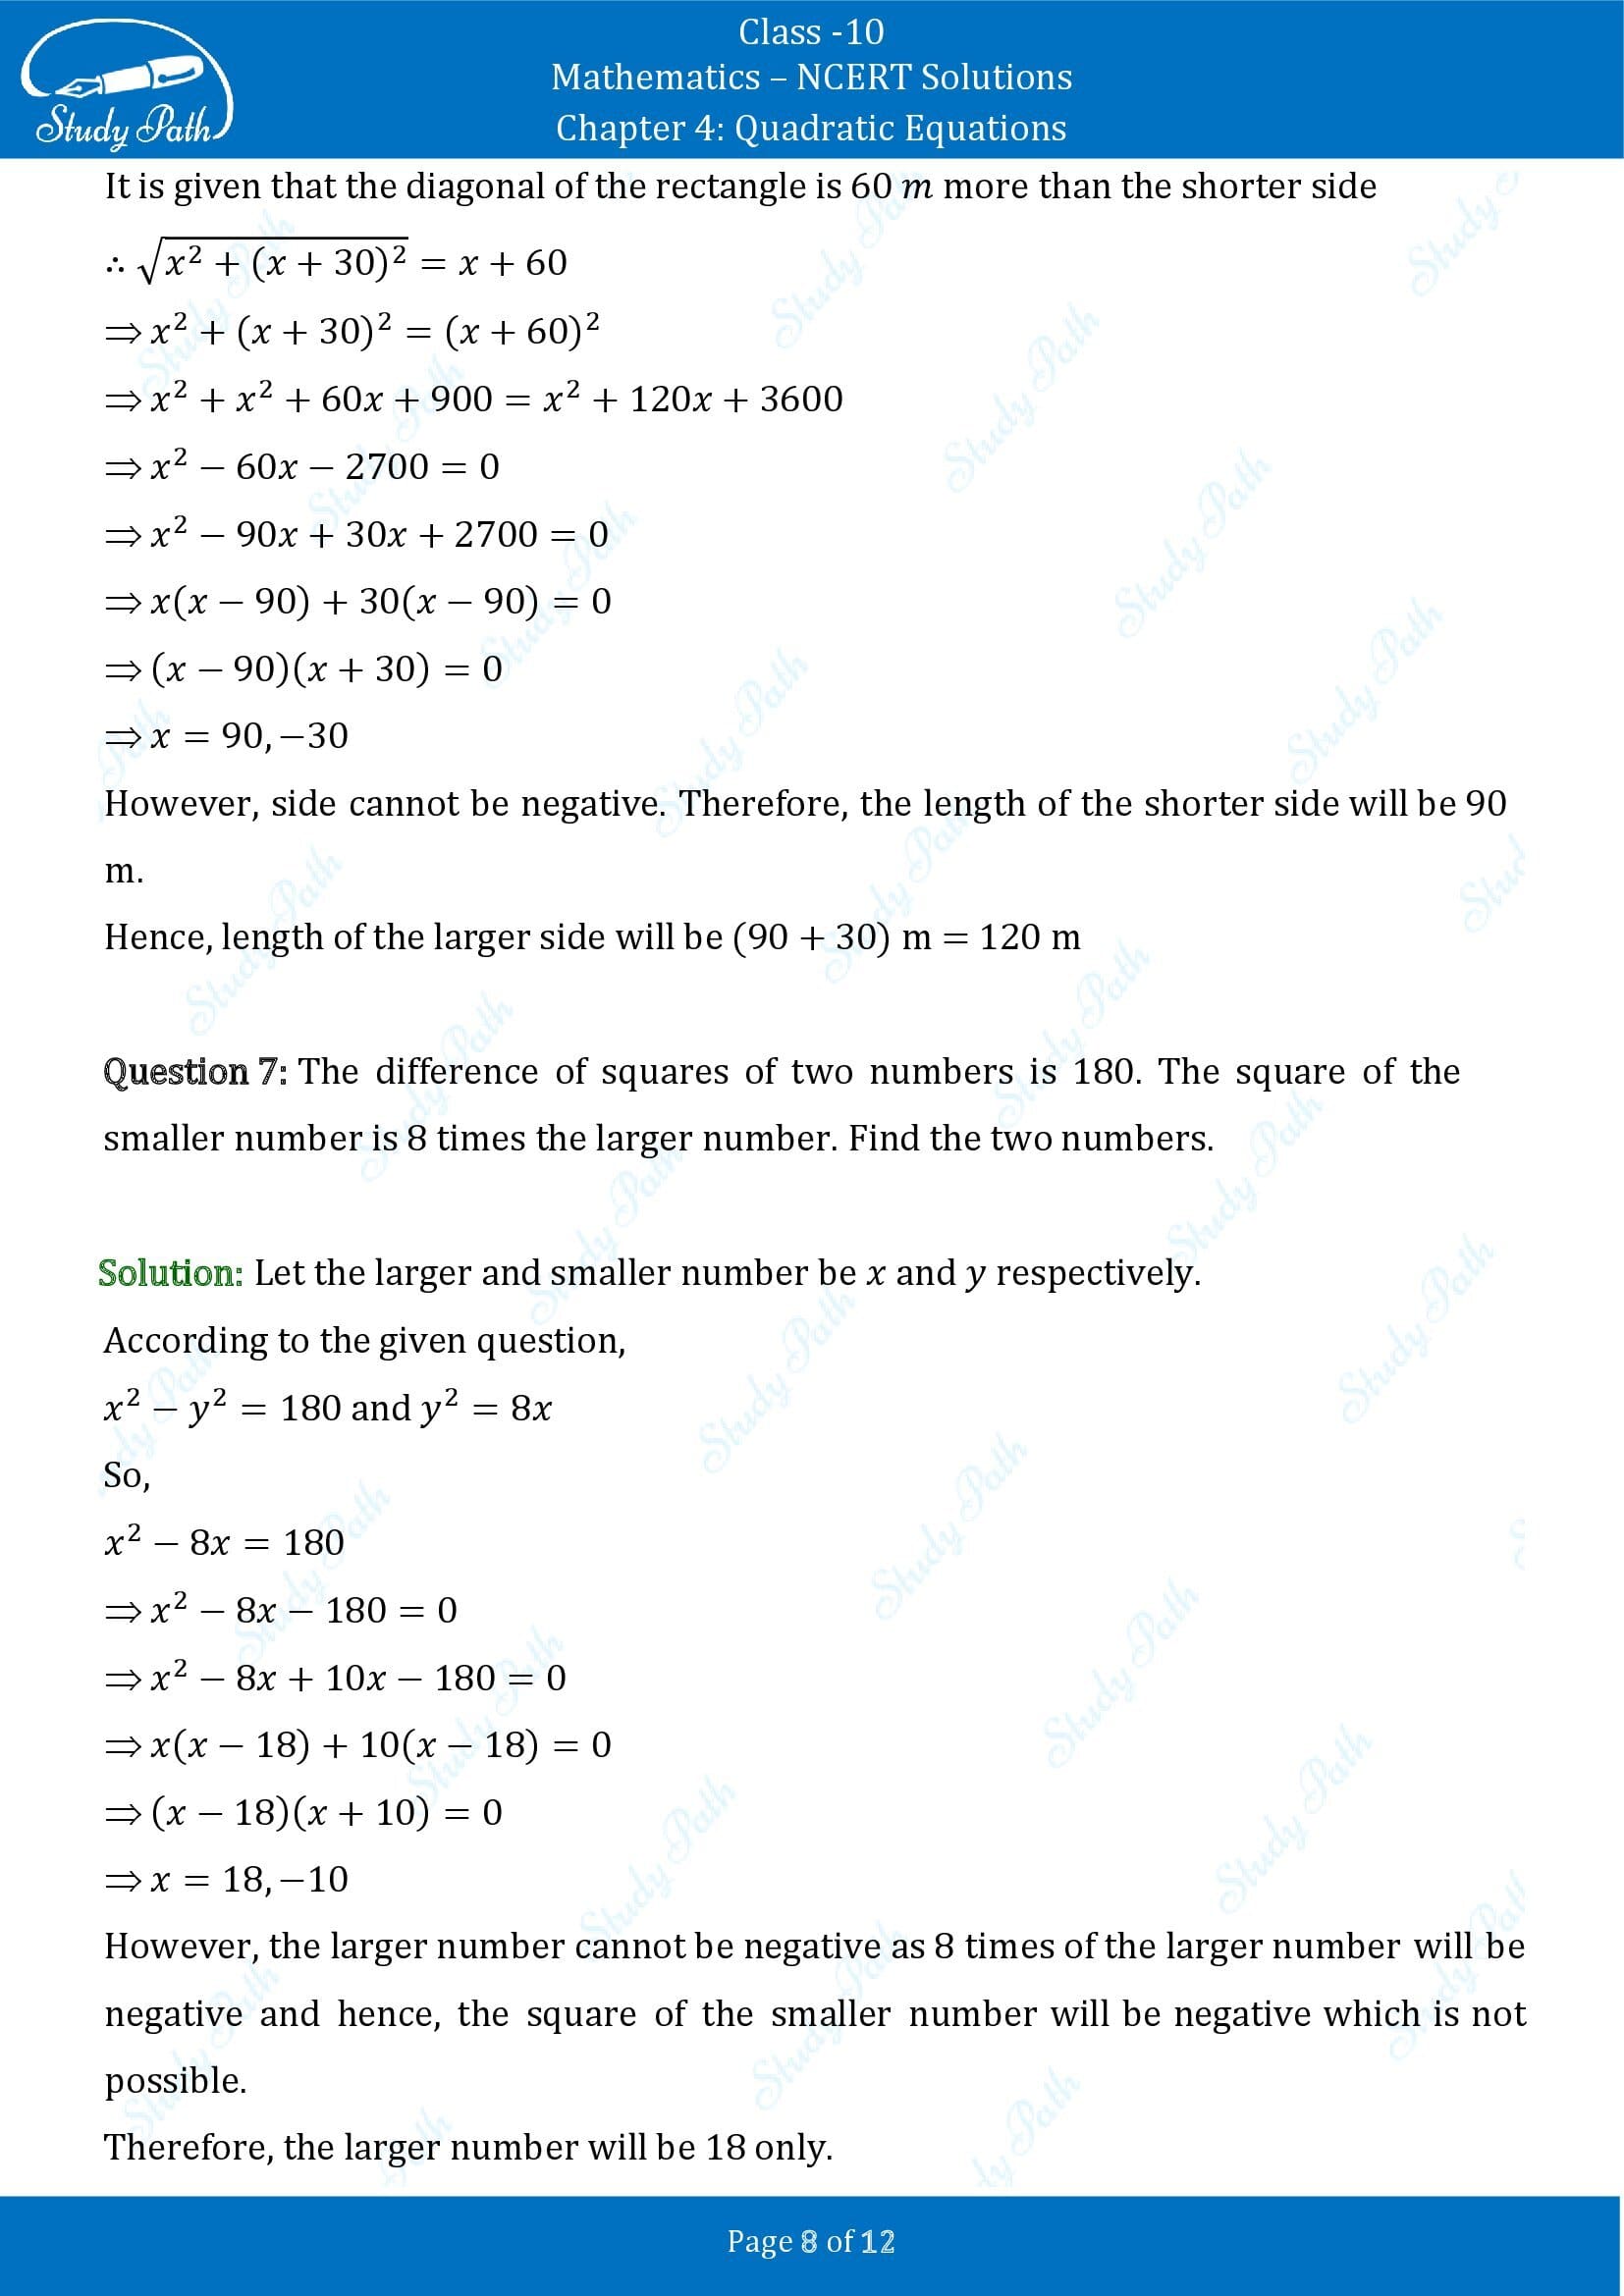 NCERT Solutions for Class 10 Maths Chapter 4 Quadratic Equations Exercise 4.3 0008